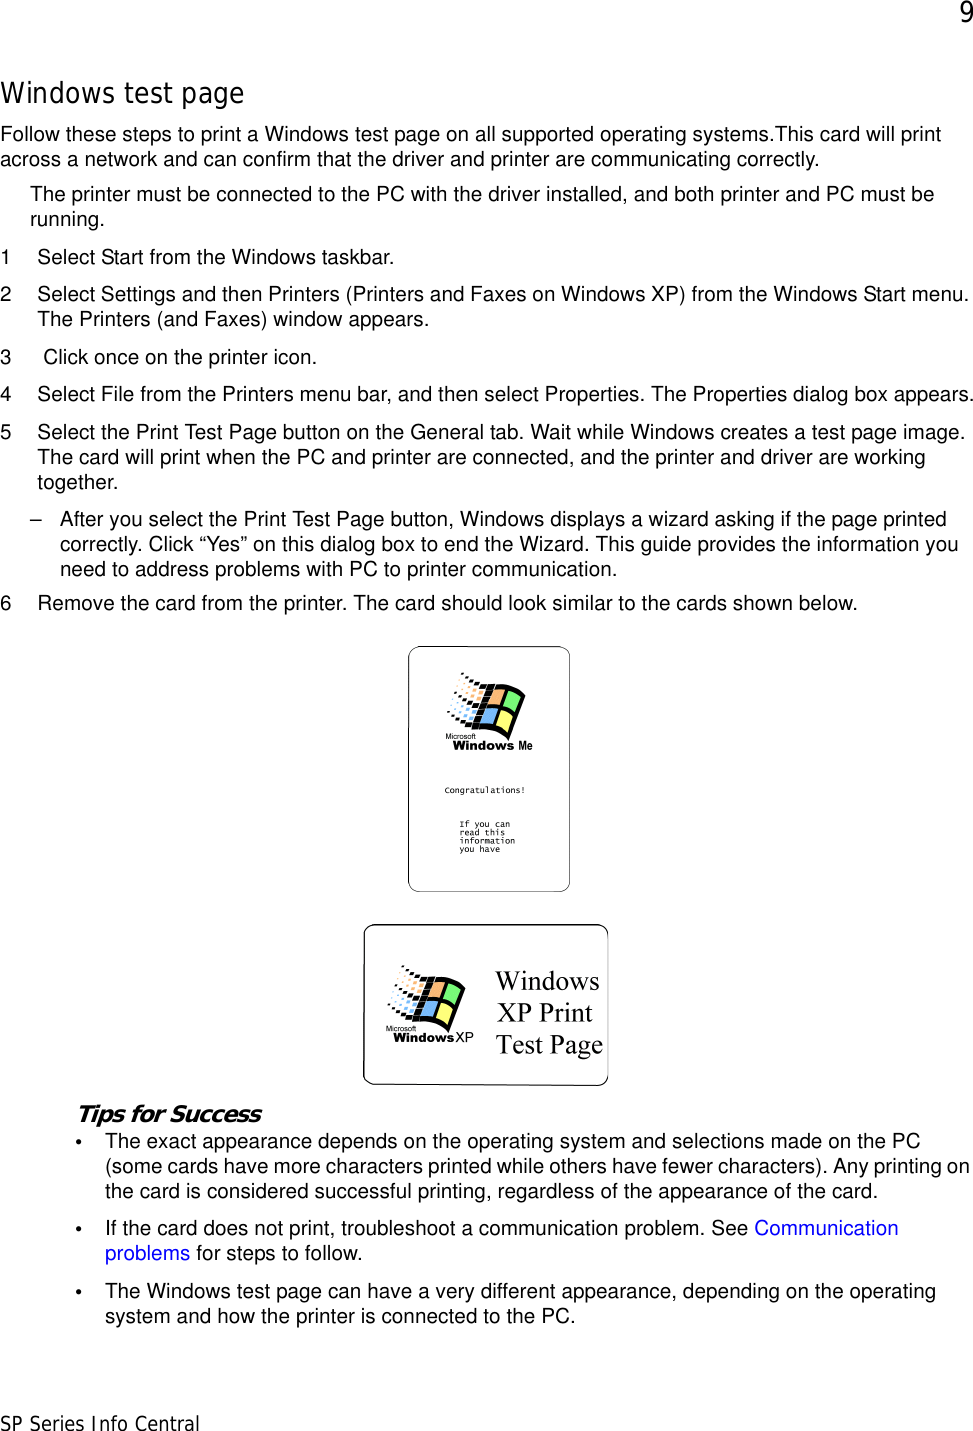 9SP Series Info CentralWindows test pageFollow these steps to print a Windows test page on all supported operating systems.This card will print across a network and can confirm that the driver and printer are communicating correctly.The printer must be connected to the PC with the driver installed, and both printer and PC must be running.1 Select Start from the Windows taskbar.2 Select Settings and then Printers (Printers and Faxes on Windows XP) from the Windows Start menu. The Printers (and Faxes) window appears.3  Click once on the printer icon.4 Select File from the Printers menu bar, and then select Properties. The Properties dialog box appears.5 Select the Print Test Page button on the General tab. Wait while Windows creates a test page image. The card will print when the PC and printer are connected, and the printer and driver are working together.– After you select the Print Test Page button, Windows displays a wizard asking if the page printed correctly. Click “Yes” on this dialog box to end the Wizard. This guide provides the information you need to address problems with PC to printer communication.6 Remove the card from the printer. The card should look similar to the cards shown below. Tips for Success•The exact appearance depends on the operating system and selections made on the PC (some cards have more characters printed while others have fewer characters). Any printing on the card is considered successful printing, regardless of the appearance of the card.•If the card does not print, troubleshoot a communication problem. See Communication problems for steps to follow.•The Windows test page can have a very different appearance, depending on the operating system and how the printer is connected to the PC.